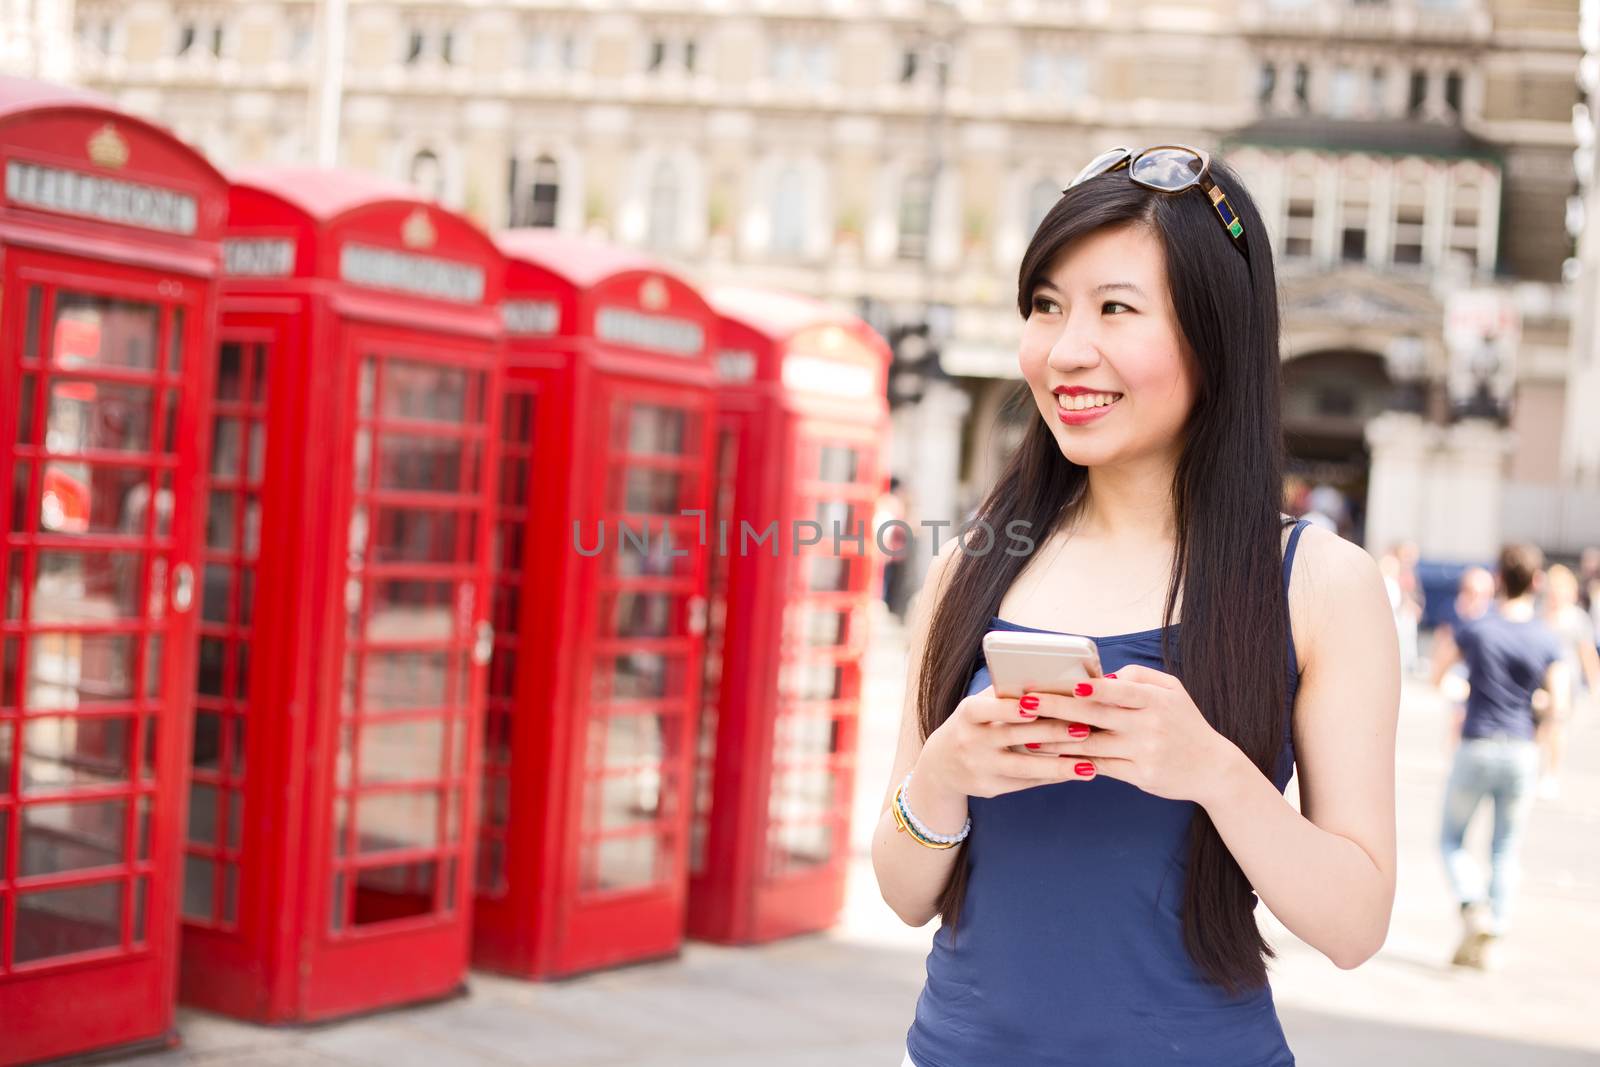 young woman in London with her phone